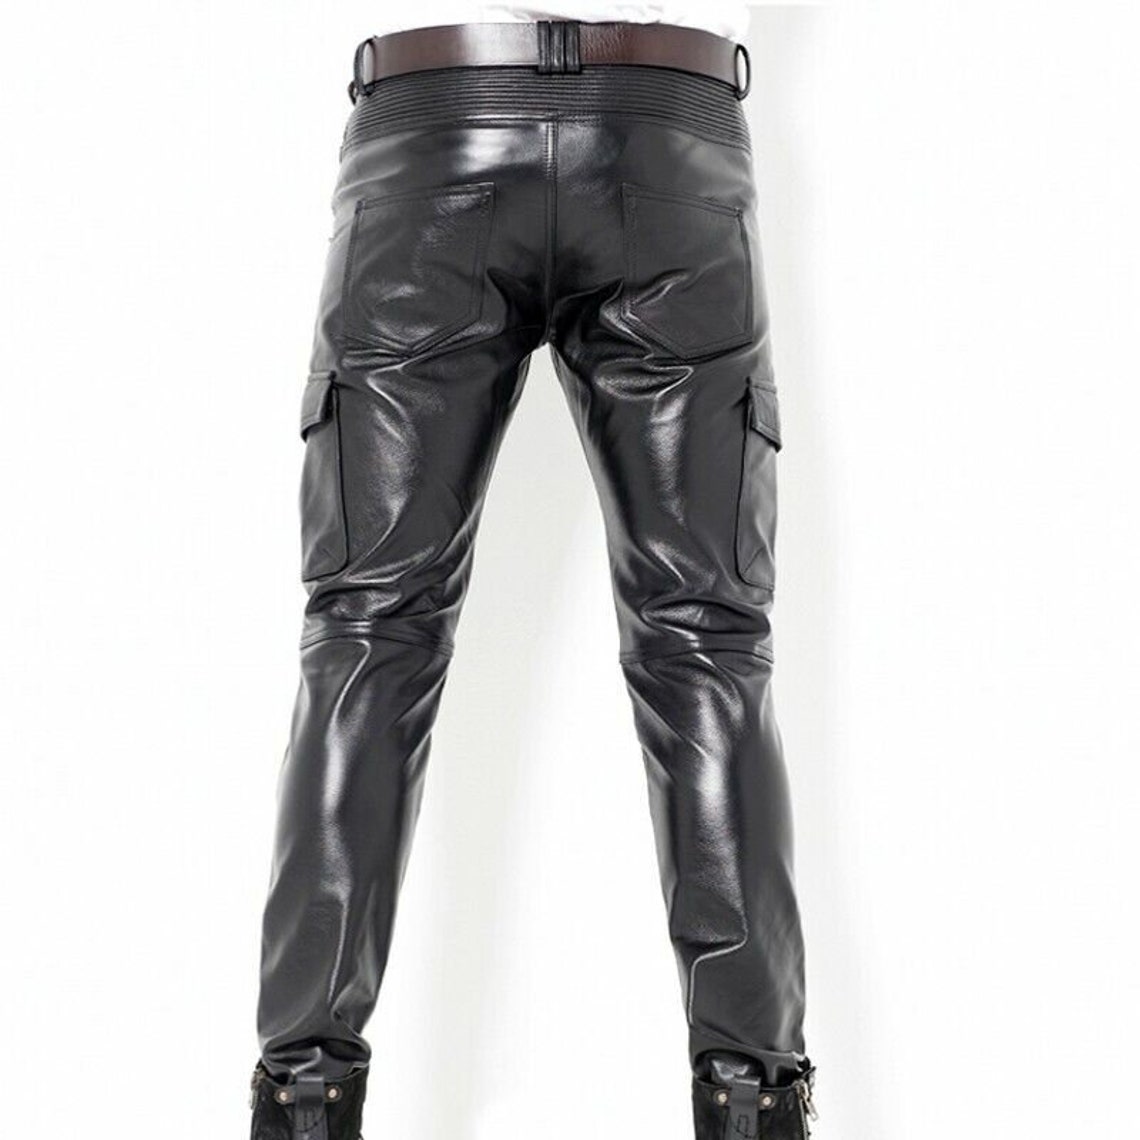 ALLEN LEATHER Men's Black Leather Pant 100% Real Soft Lambskin Leather ...